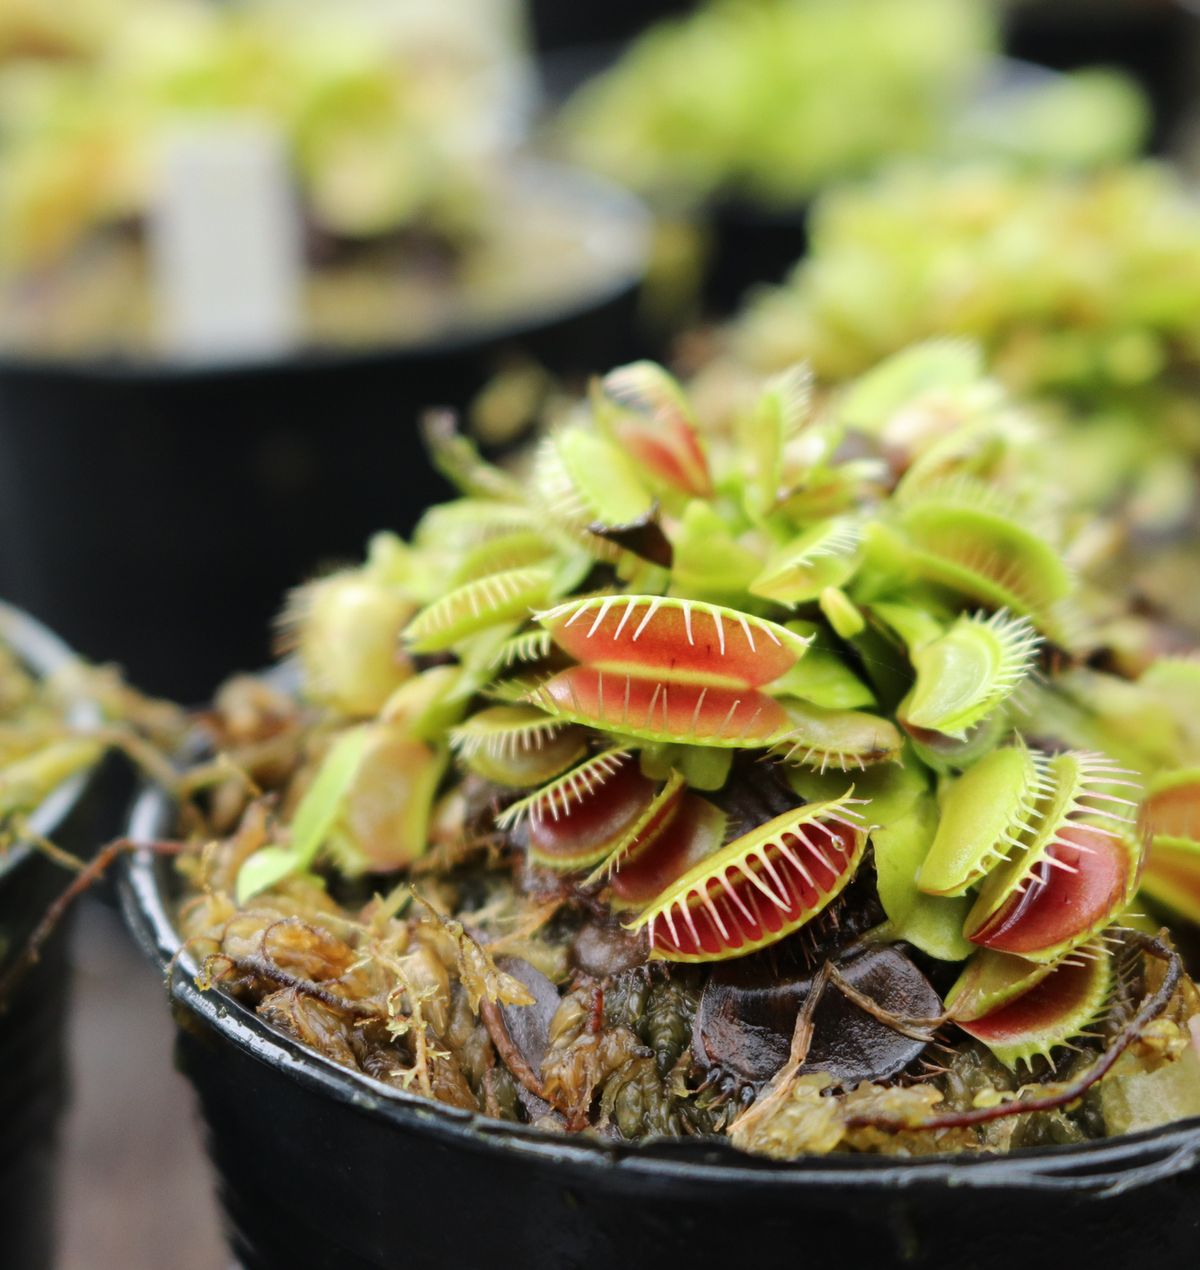 How to Grow and Care for Venus Flytrap Plants Indoors